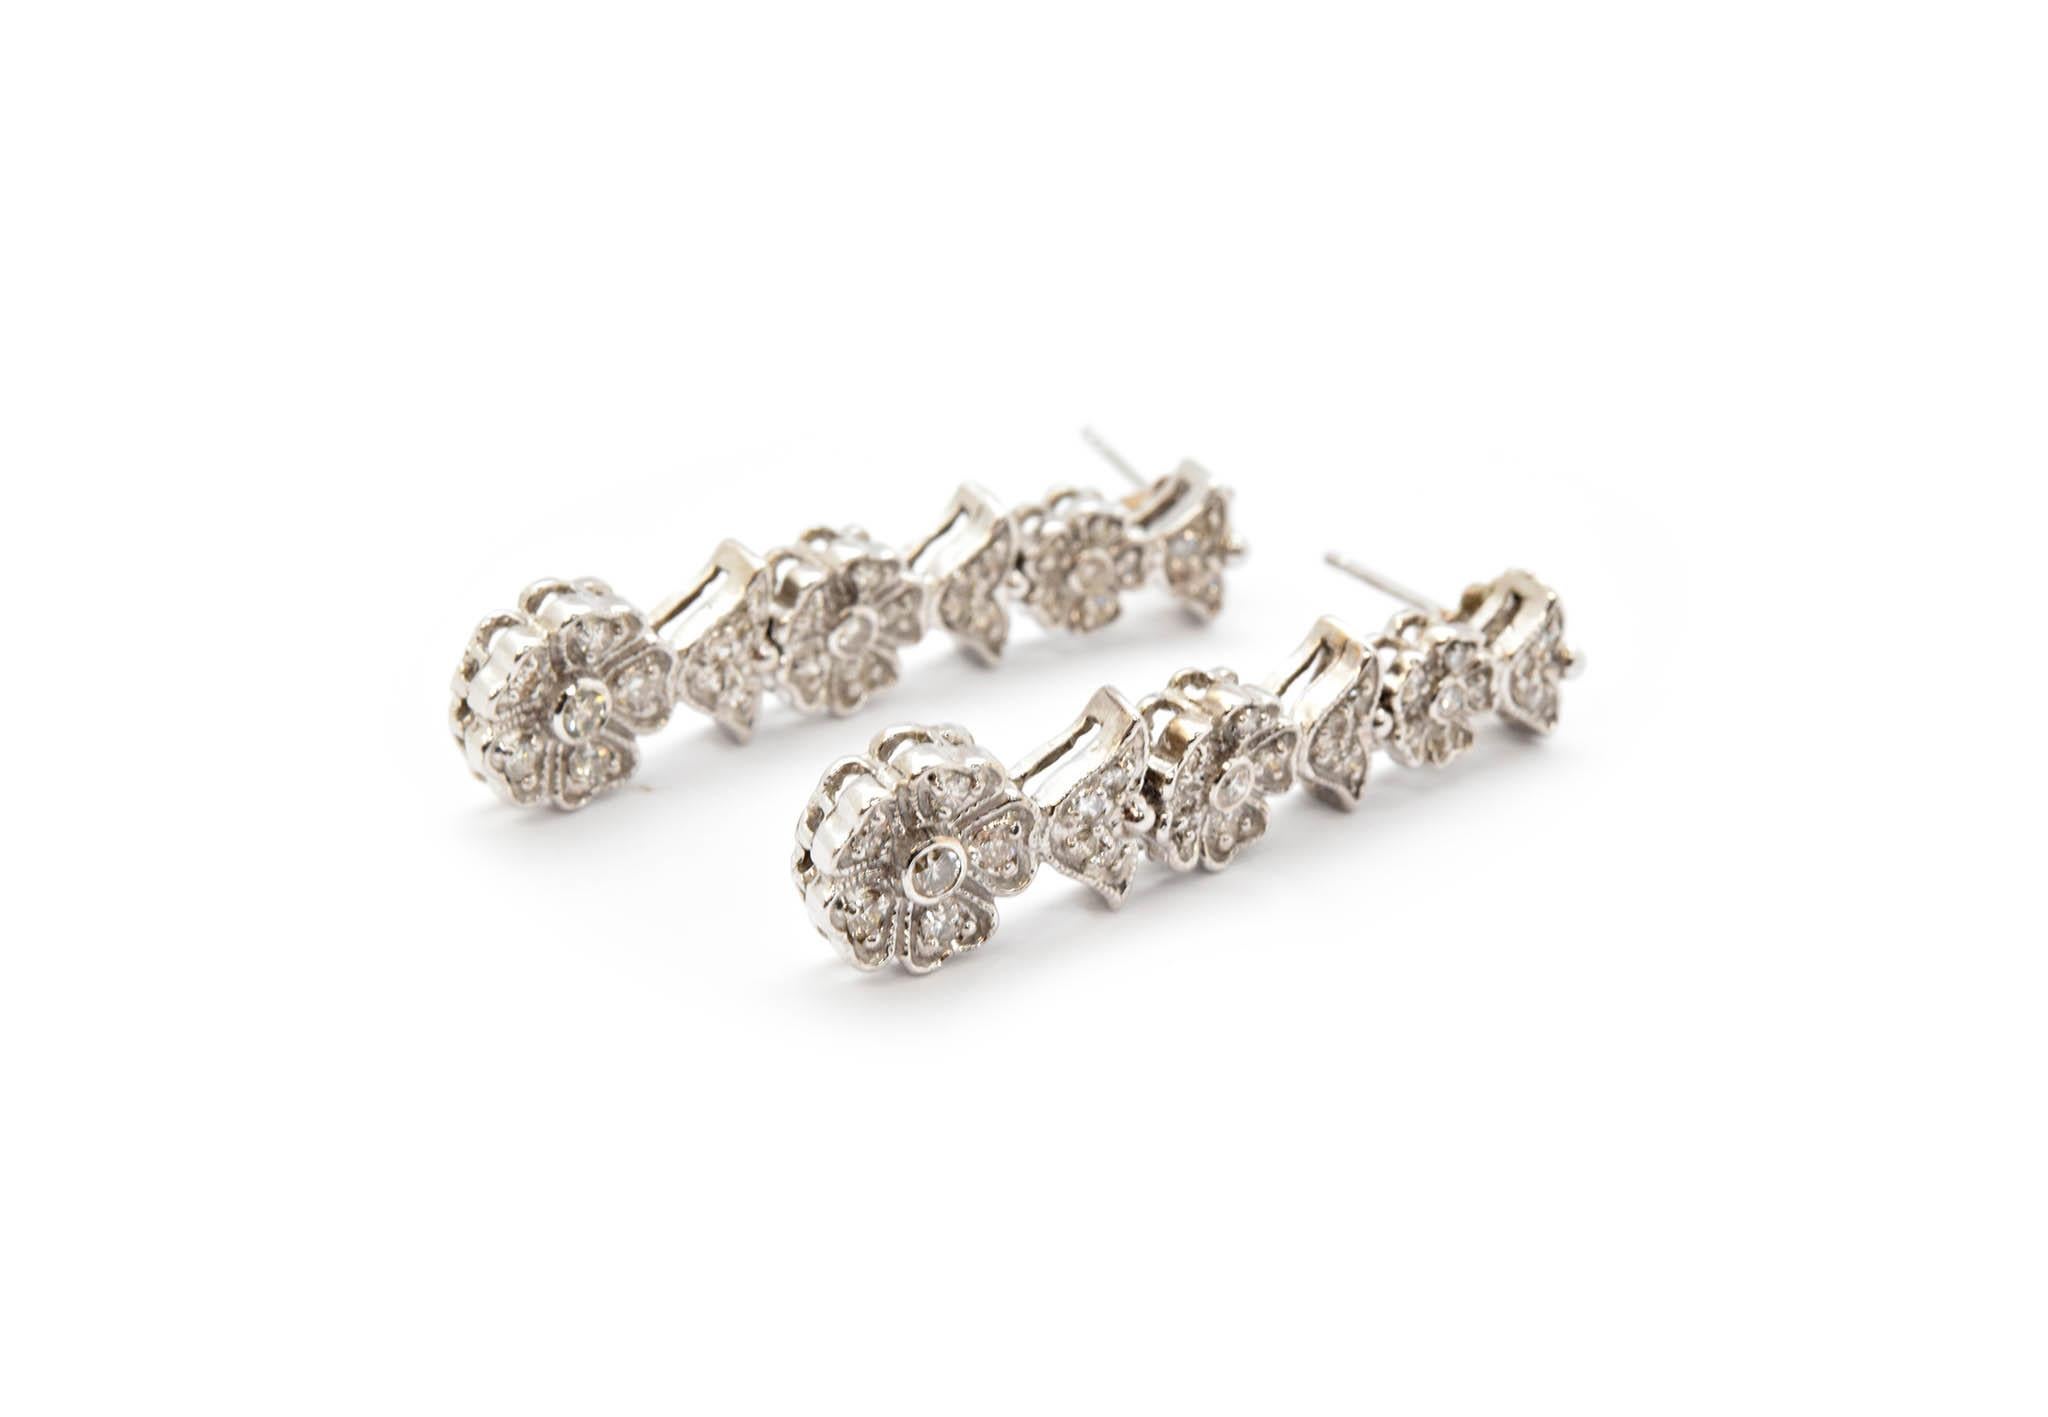 These earrings are made in 14k yellow gold by designer Daniel W. The earrings have a woven texture to them, and they are set with round diamonds. The diamonds have a total weight of 0.30ct, and they are graded H in color and SI in clarity. The